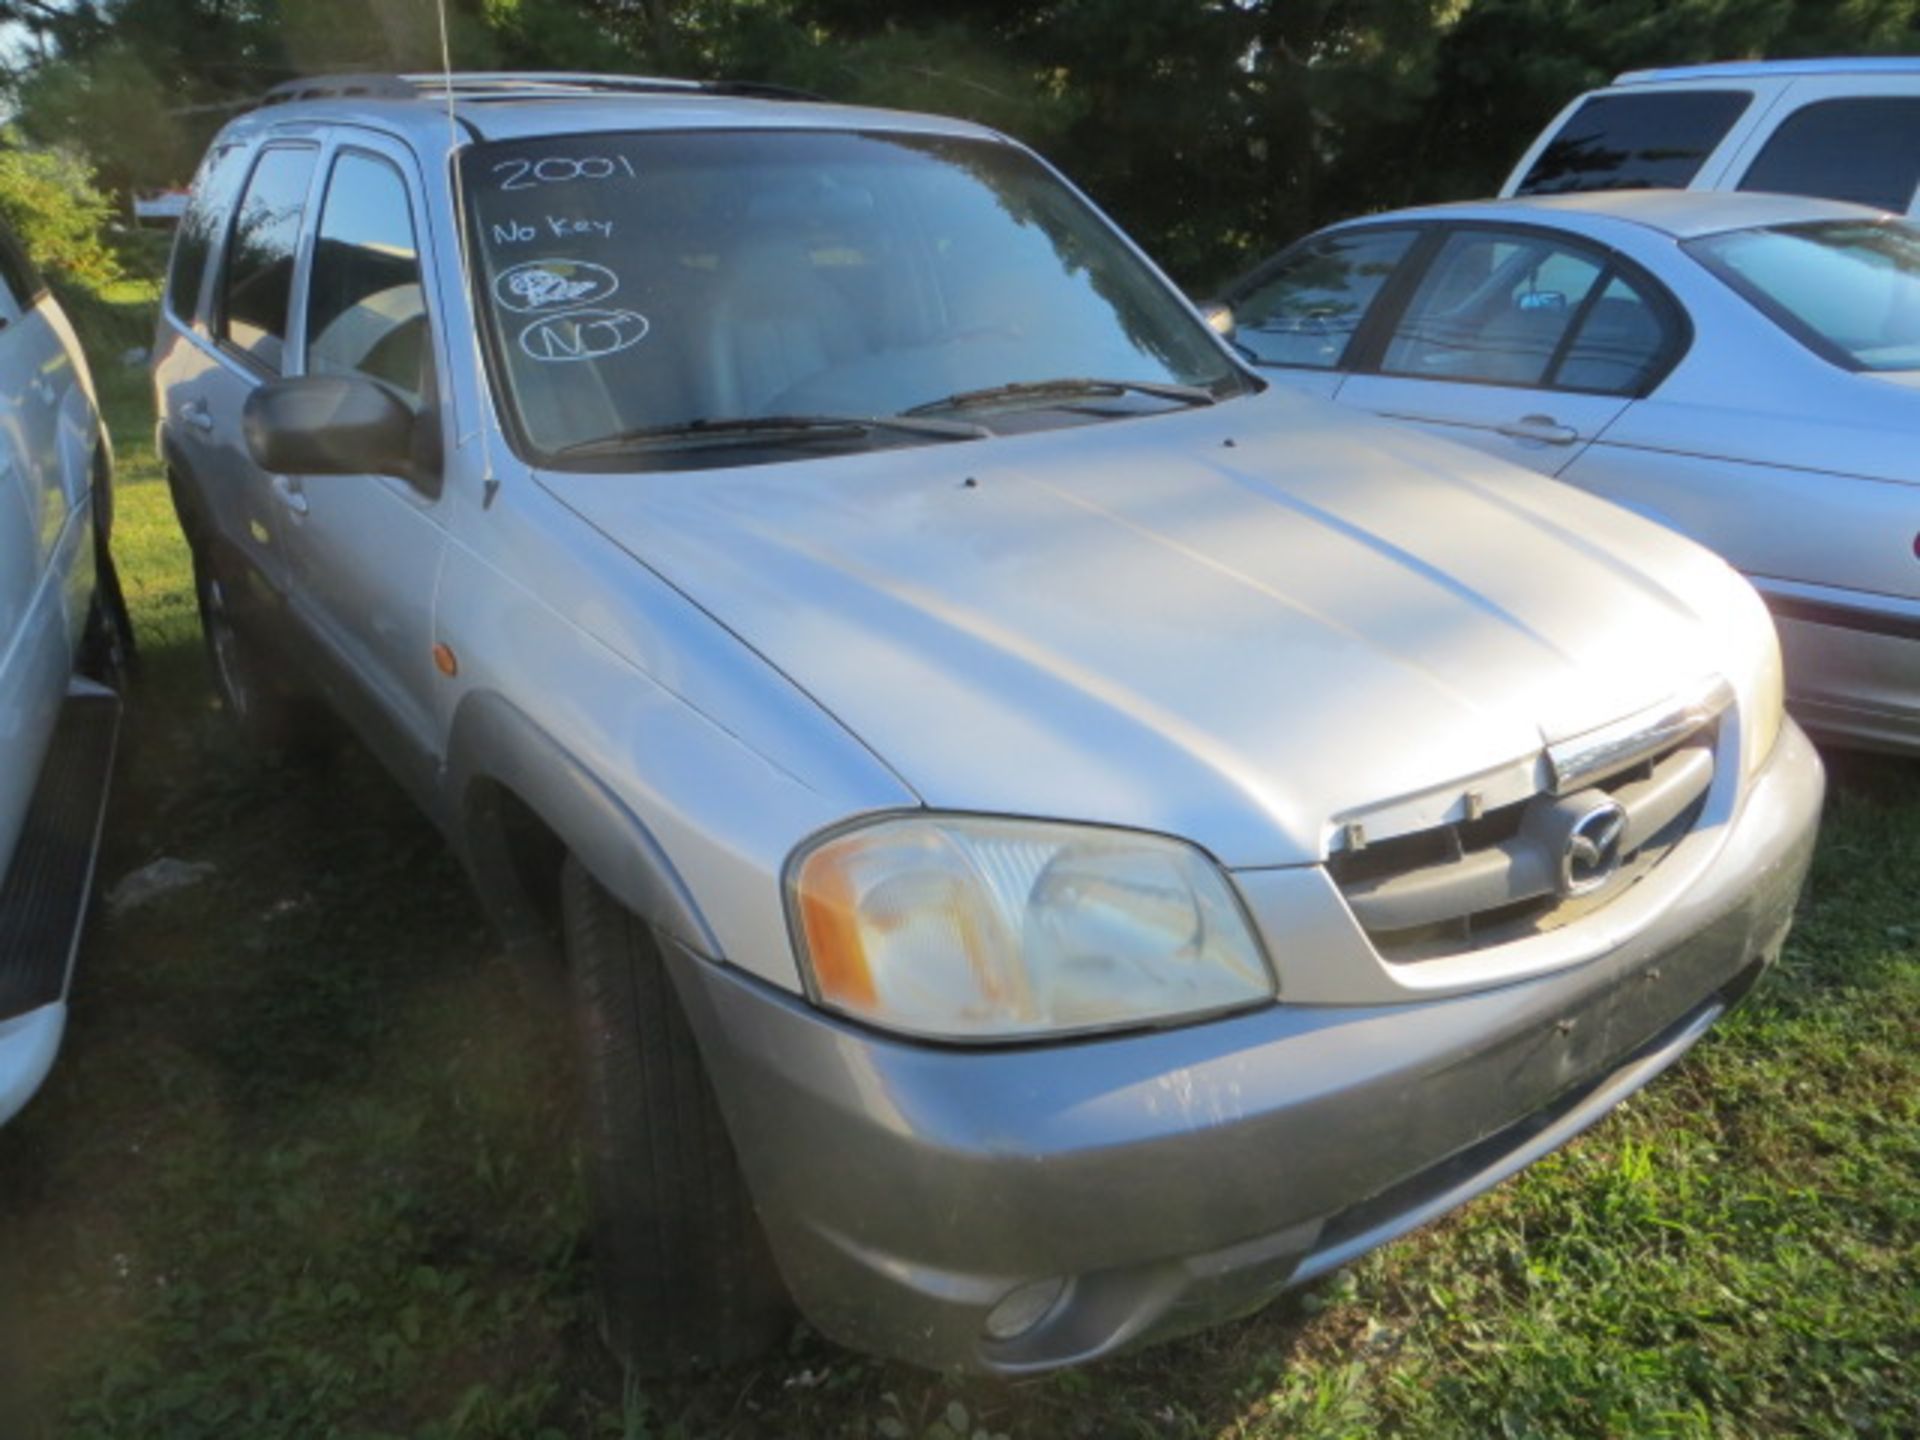 2001 MAZDA TRIBUTE ES-V6- UKNOWN MILES,VIN 4F2CU08181KM31349, SOLD WITH GOOD TRANSFERABLE TITLE